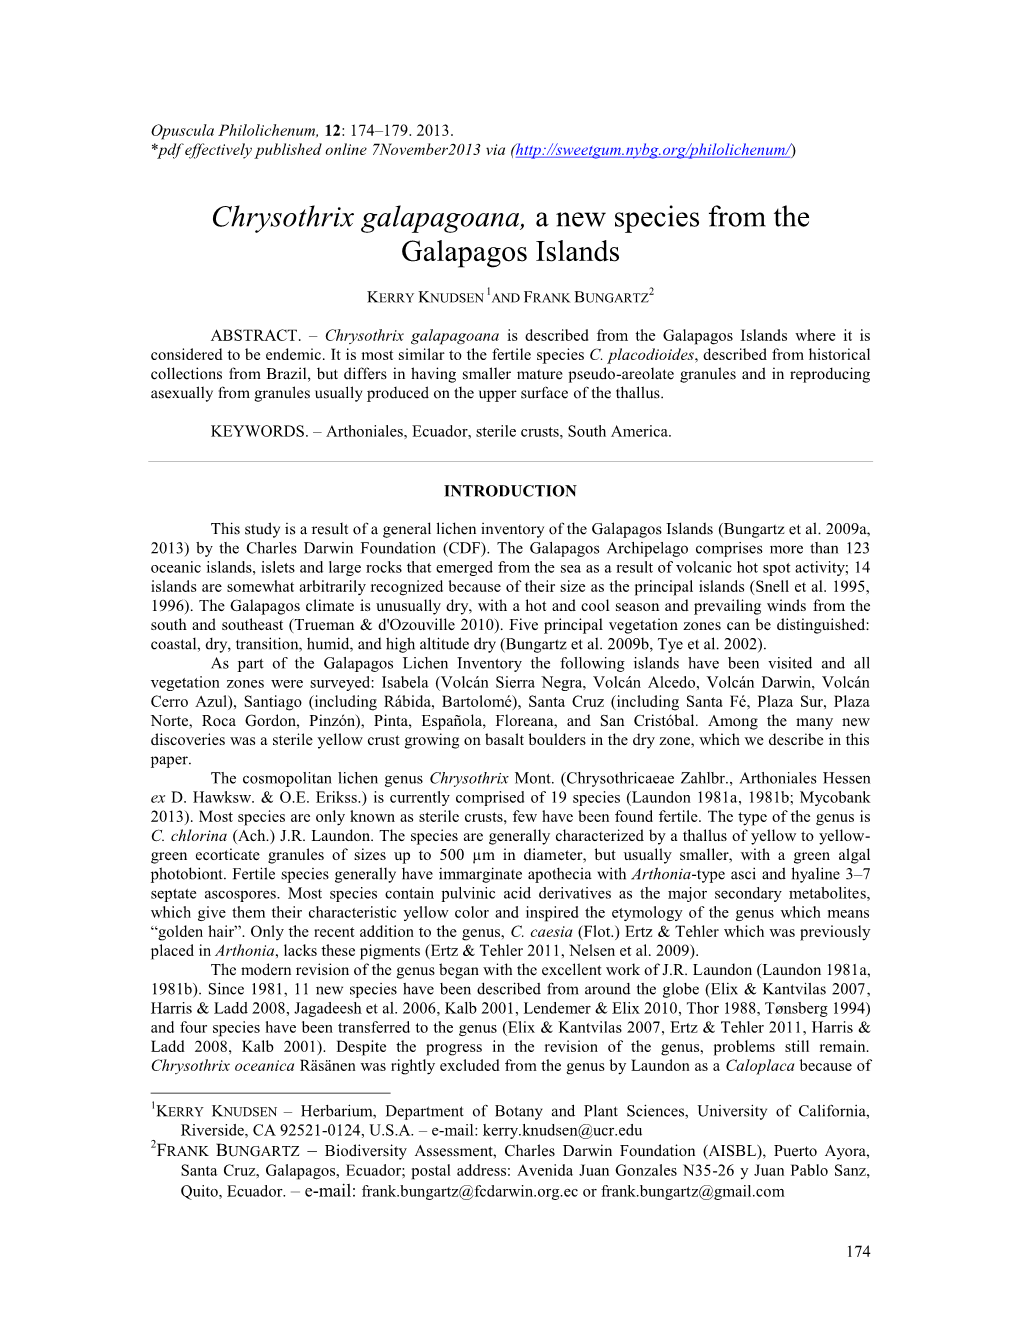 Chrysothrix Galapagoana, a New Species from the Galapagos Islands